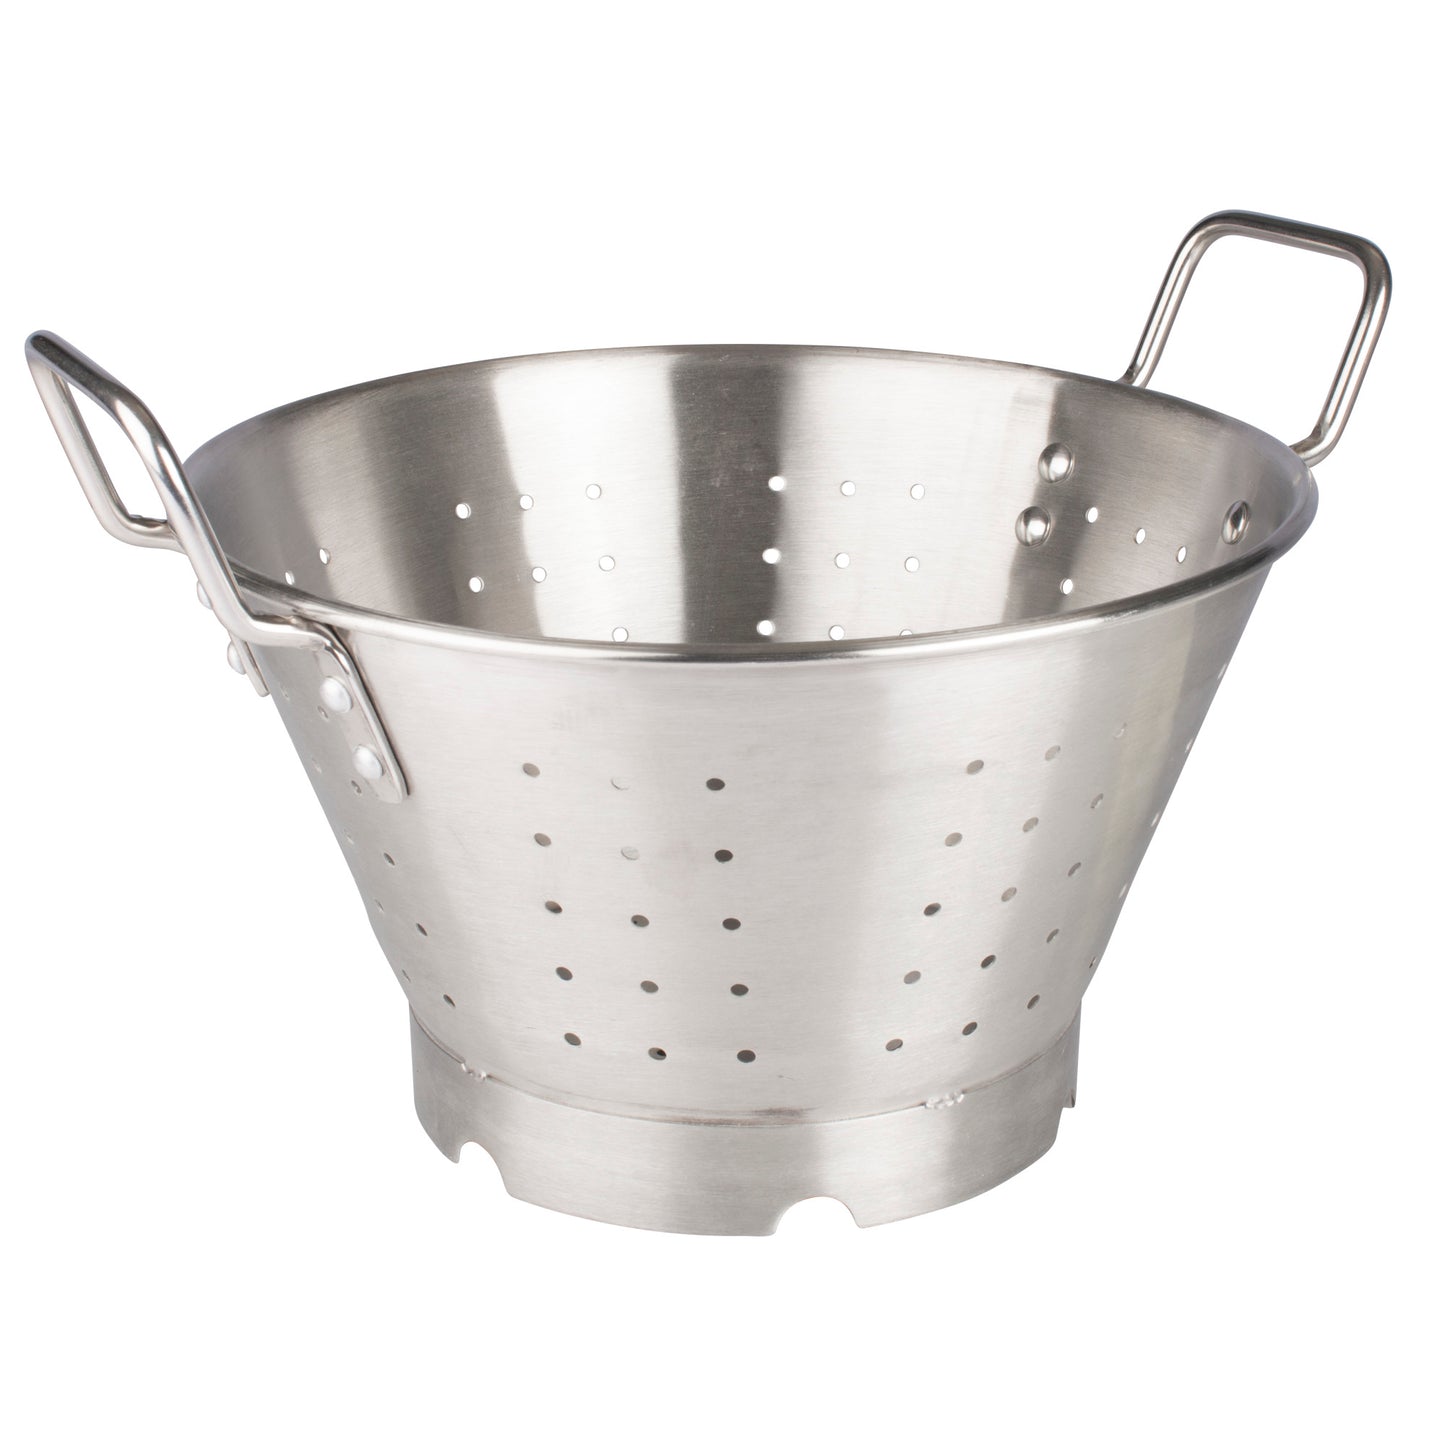 SLO-11 - Colander with Handles & Base, Heavy-Duty Stainless Steel - 11 Quart